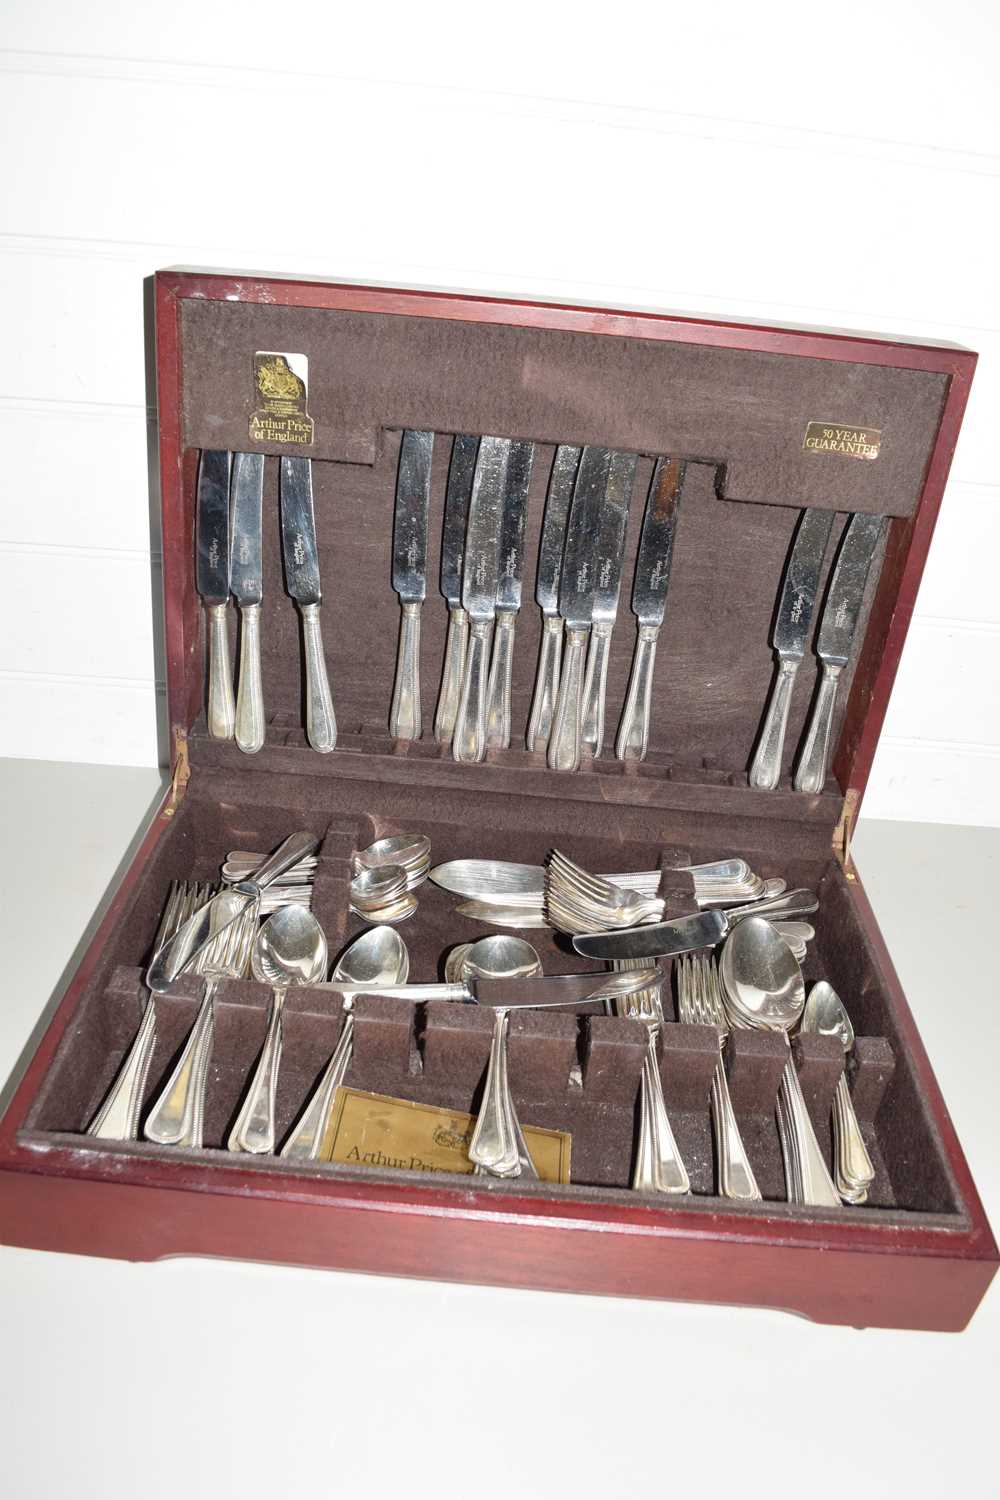 QUANTITY OF SILVER PLATED CUTLERY PRODUCED BY ARTHUR PRICE, IN ORIGINAL BOX - Image 2 of 2